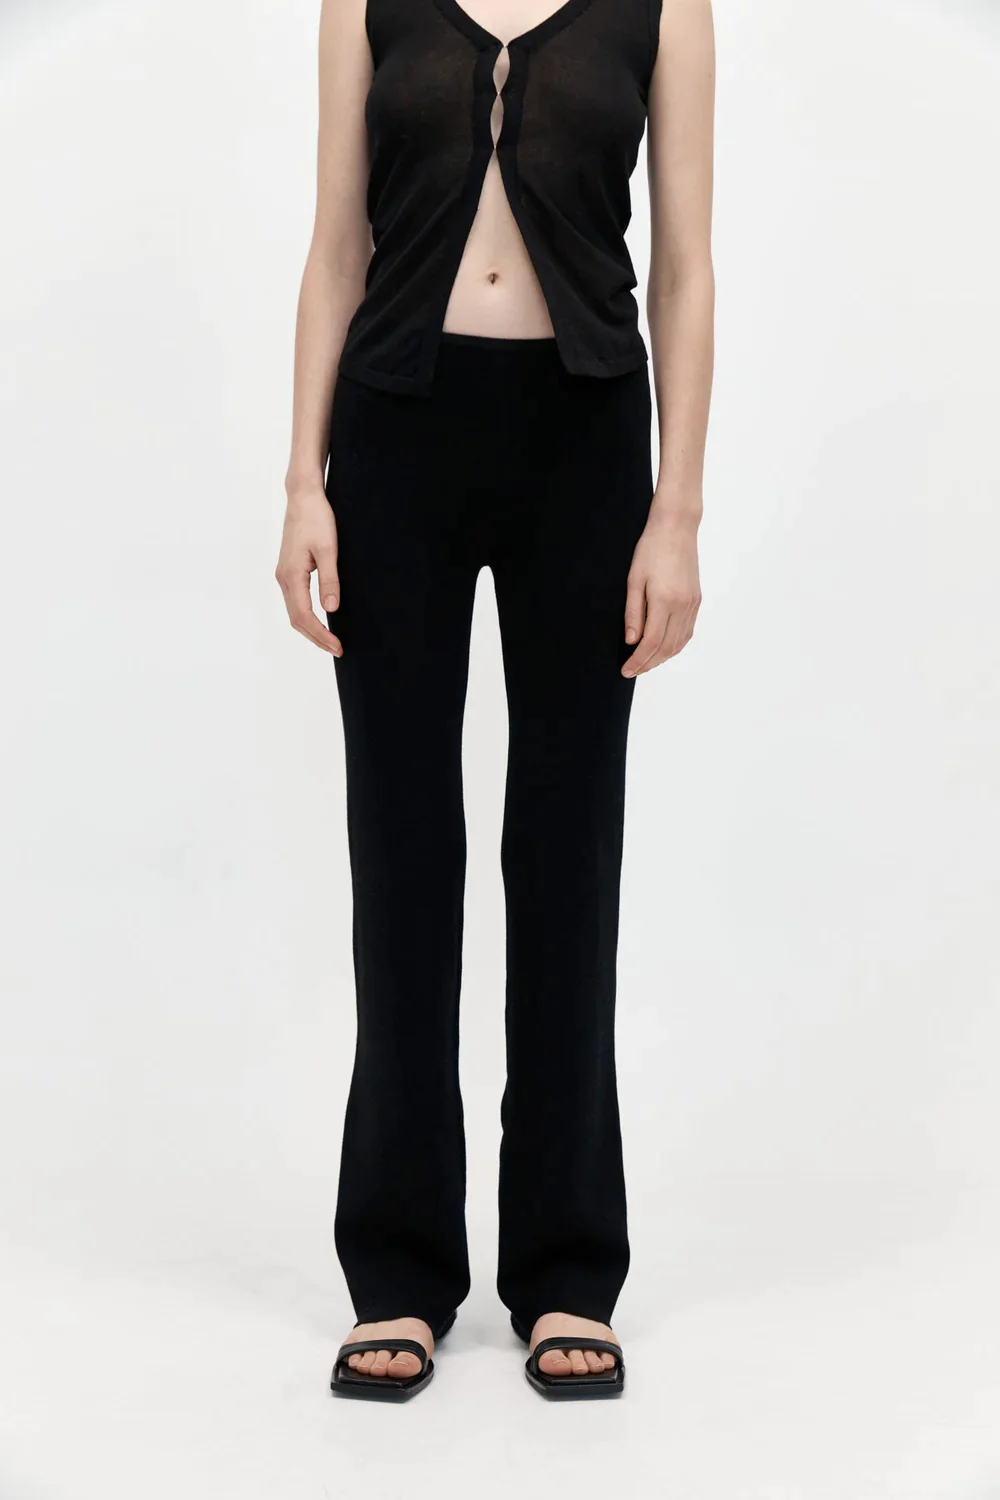 Product Image for Low Waist Knit Pants, Black